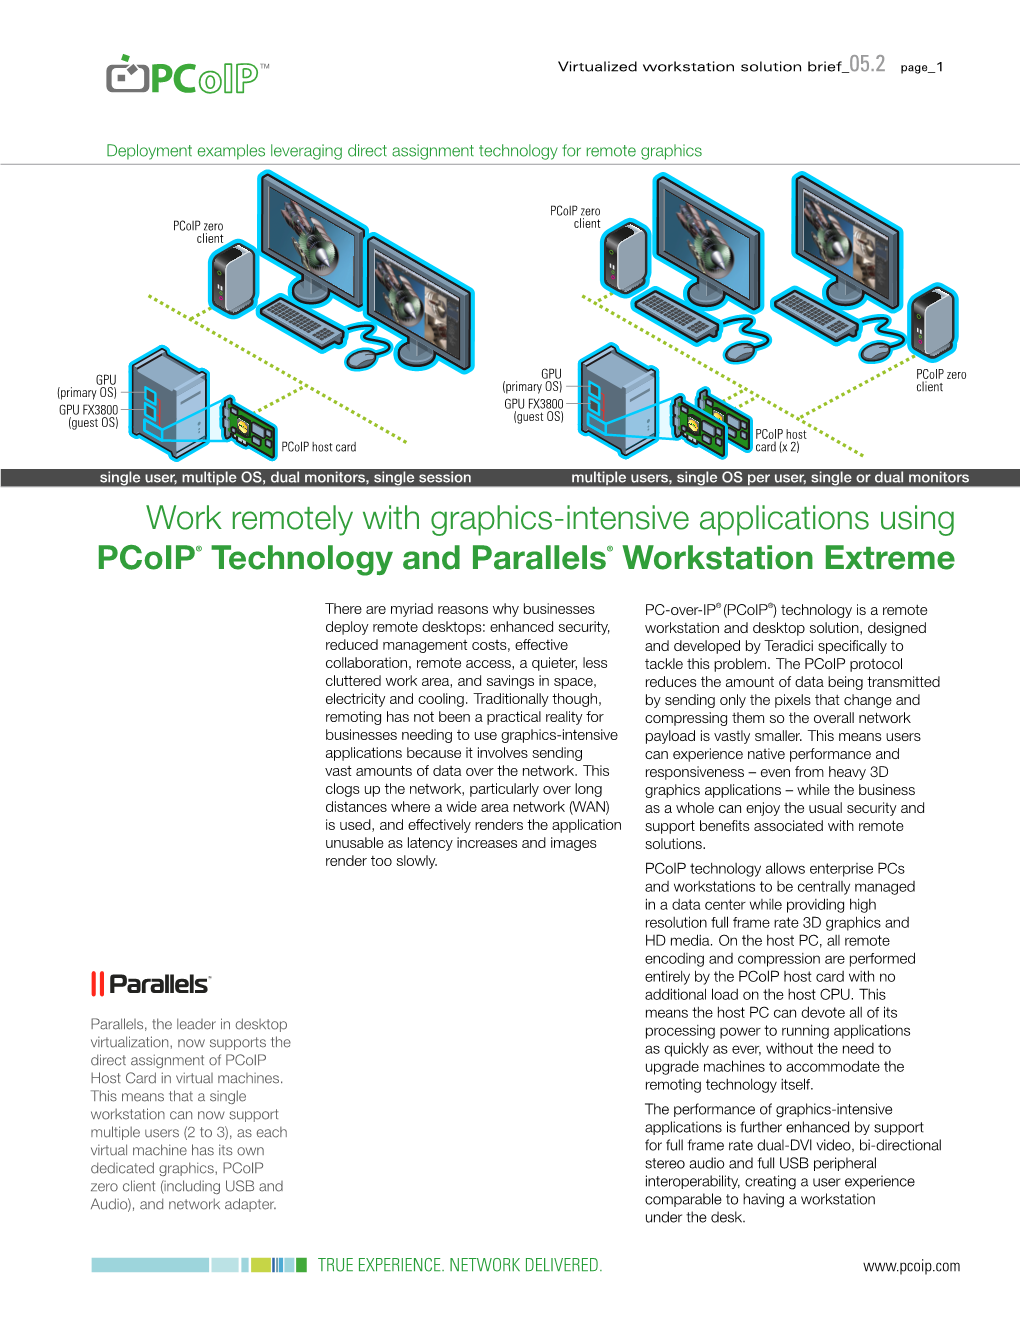 Pcoip Virtualized Remote Workstation Solution Brief